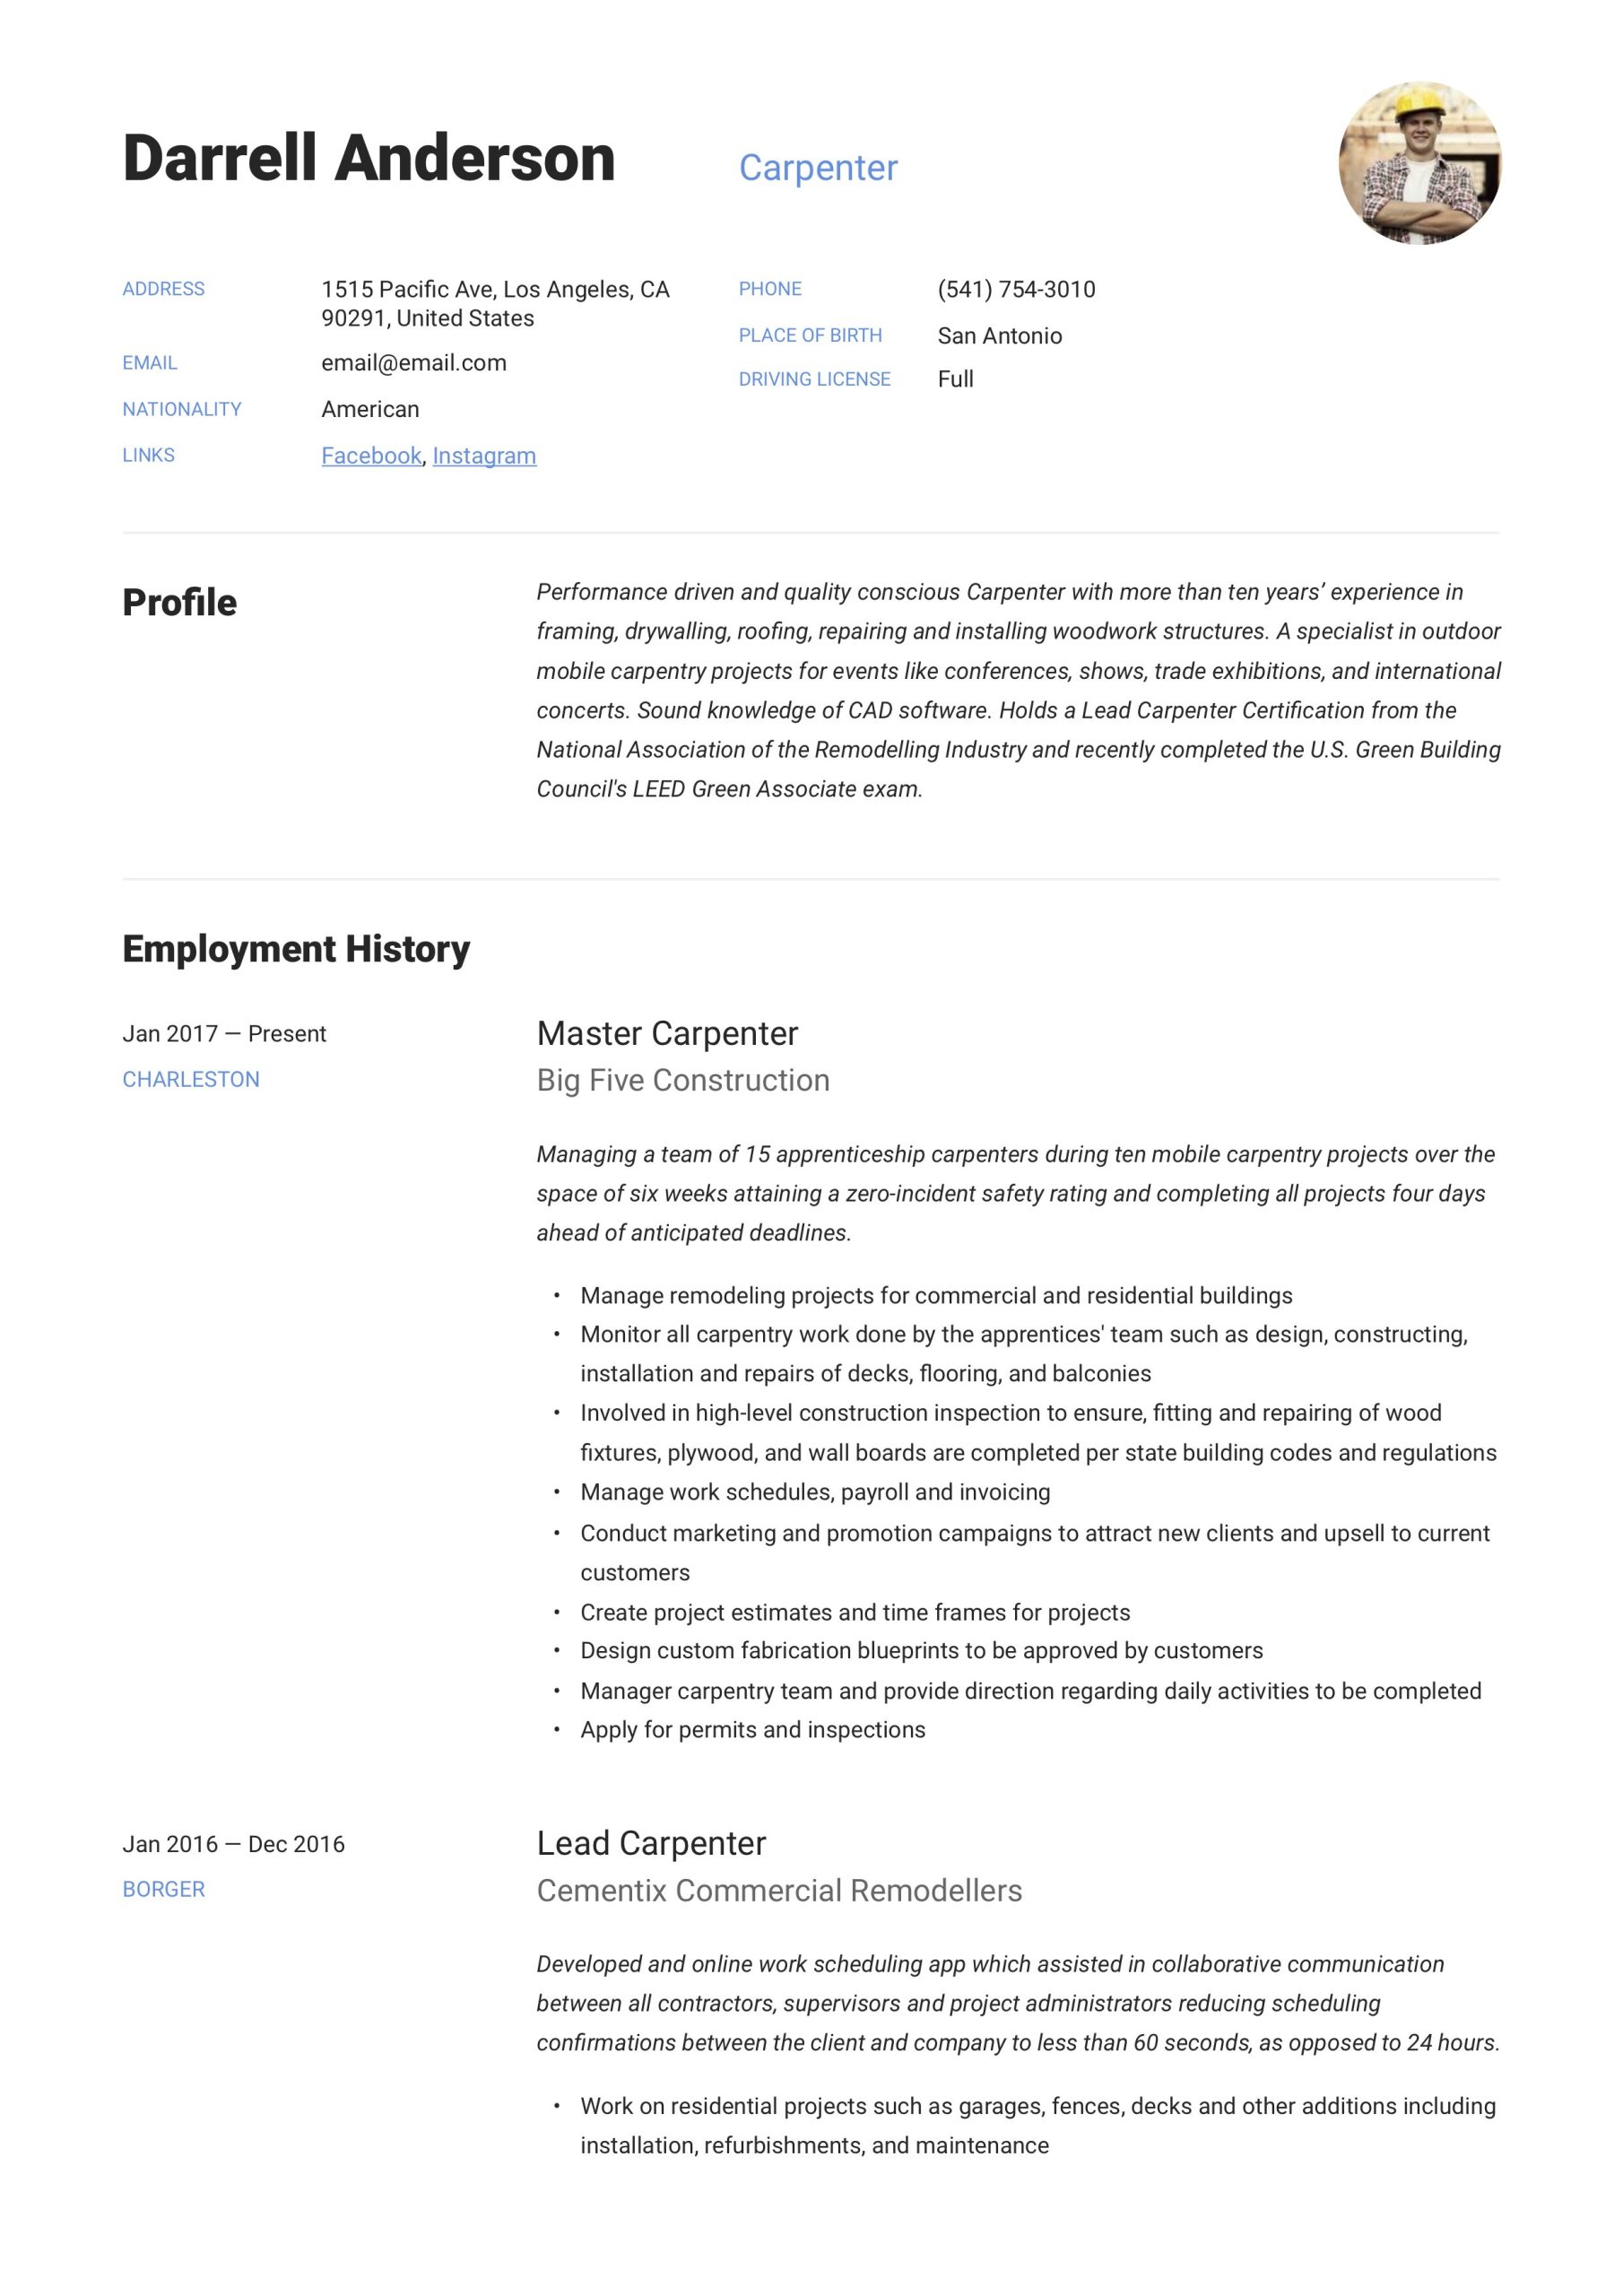 Windows and Doors Bussiness Owner Resume Sample Carpenter Resume & Writing Guide  12 Resume Examples 2022